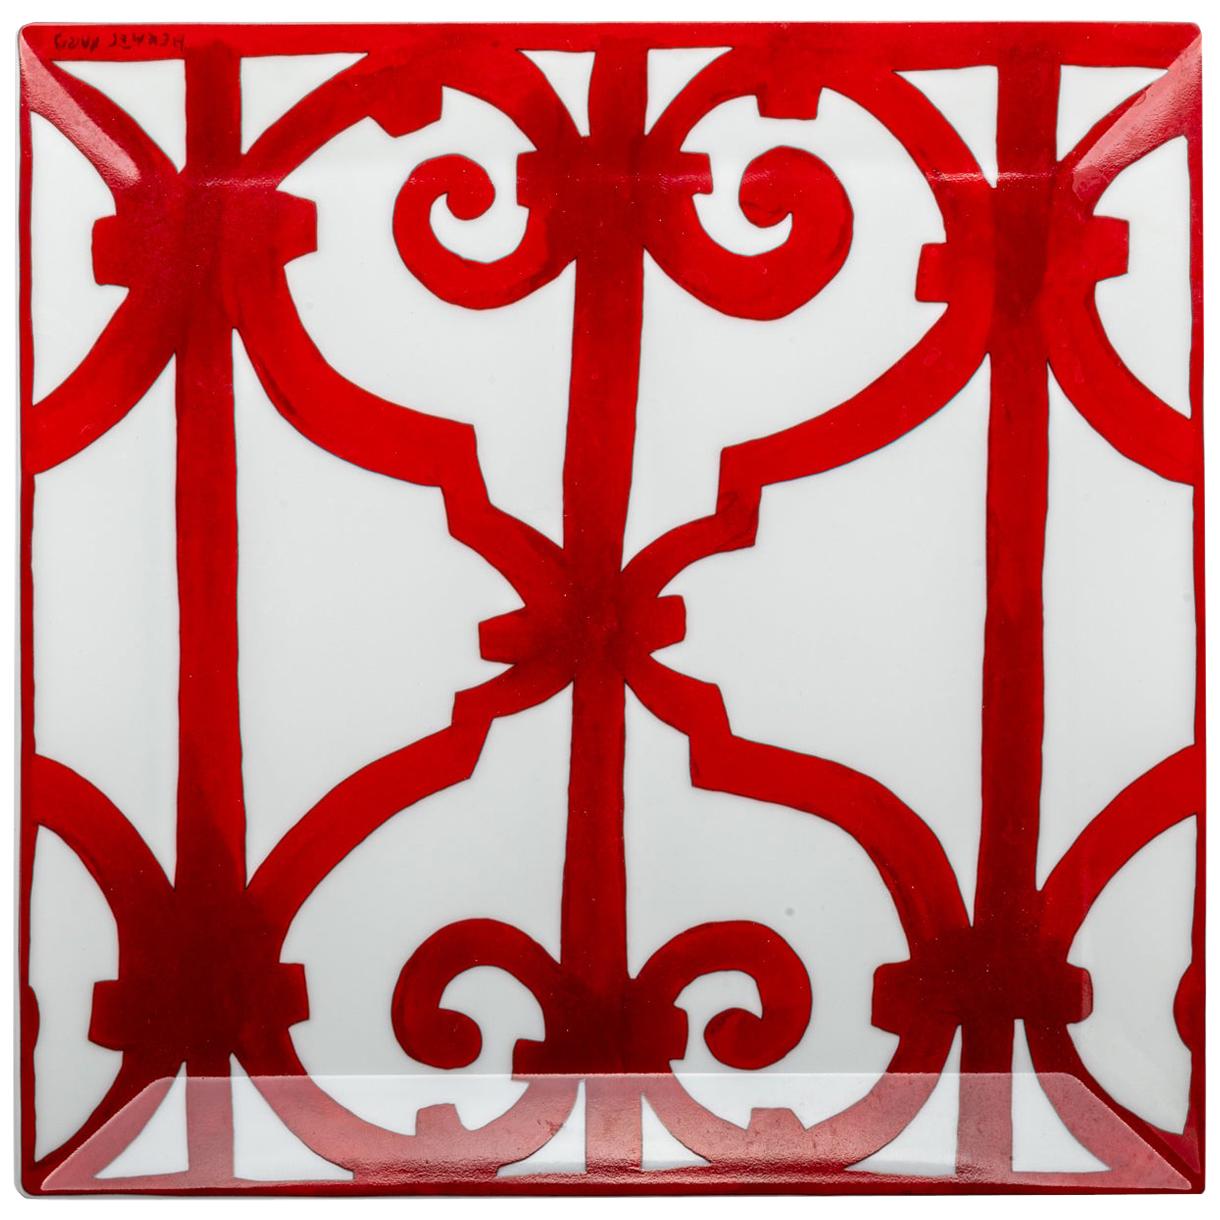 Hermes Red & White Square Plate